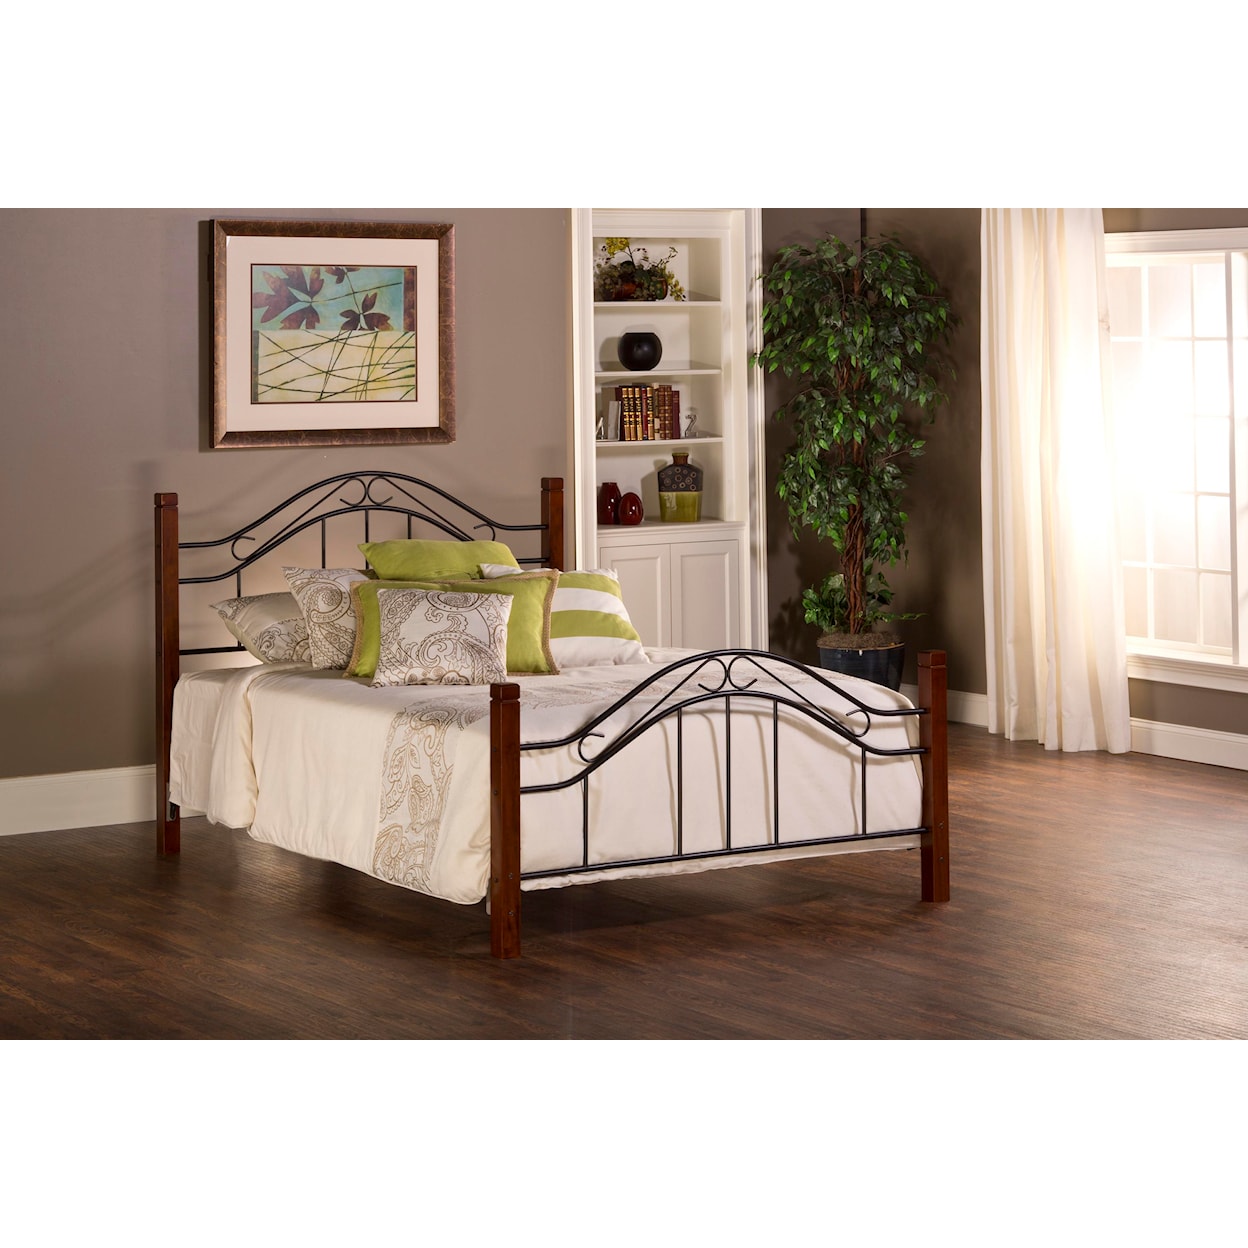 Hillsdale Metal Beds Matson King Bed Set Without Rails